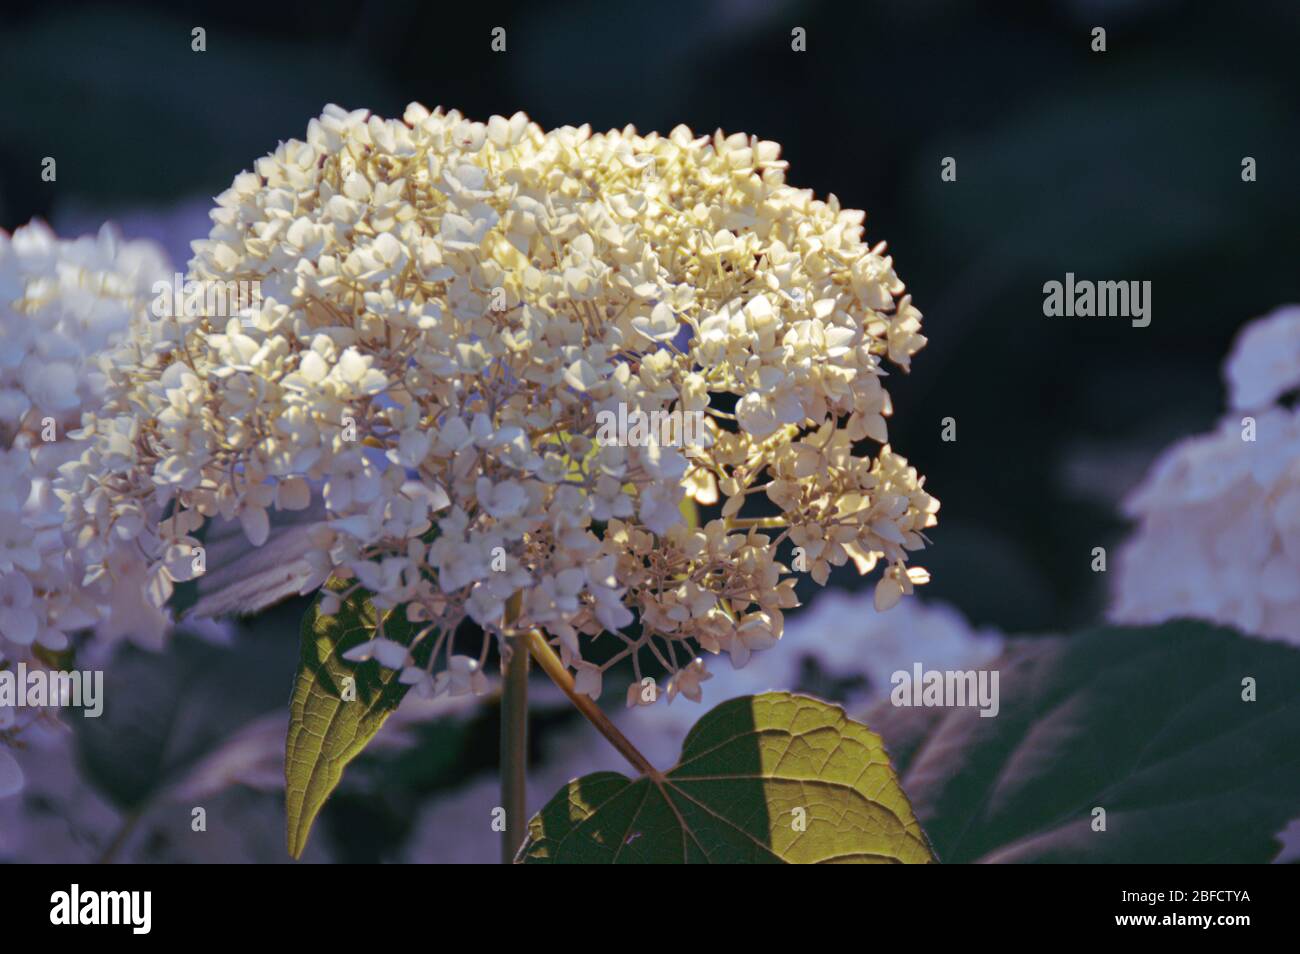 Flowers in full bloom in the early days of Spring time season Stock Photo